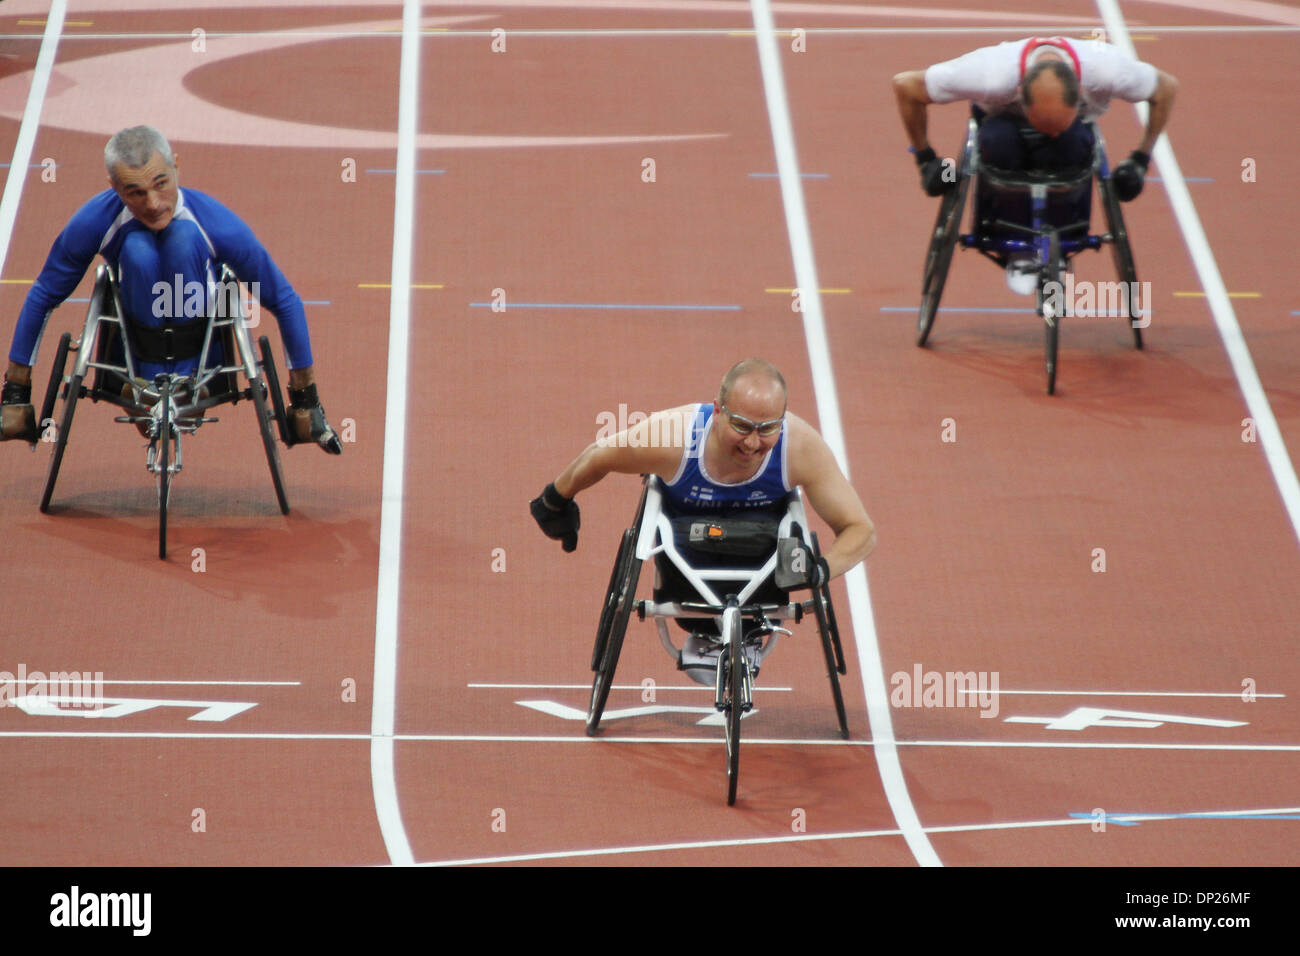 Toni Piispanen of Finland wins gold in the mens 100m - T51 in the Olympic stadium at the London 2012 Paralympic games. Stock Photo